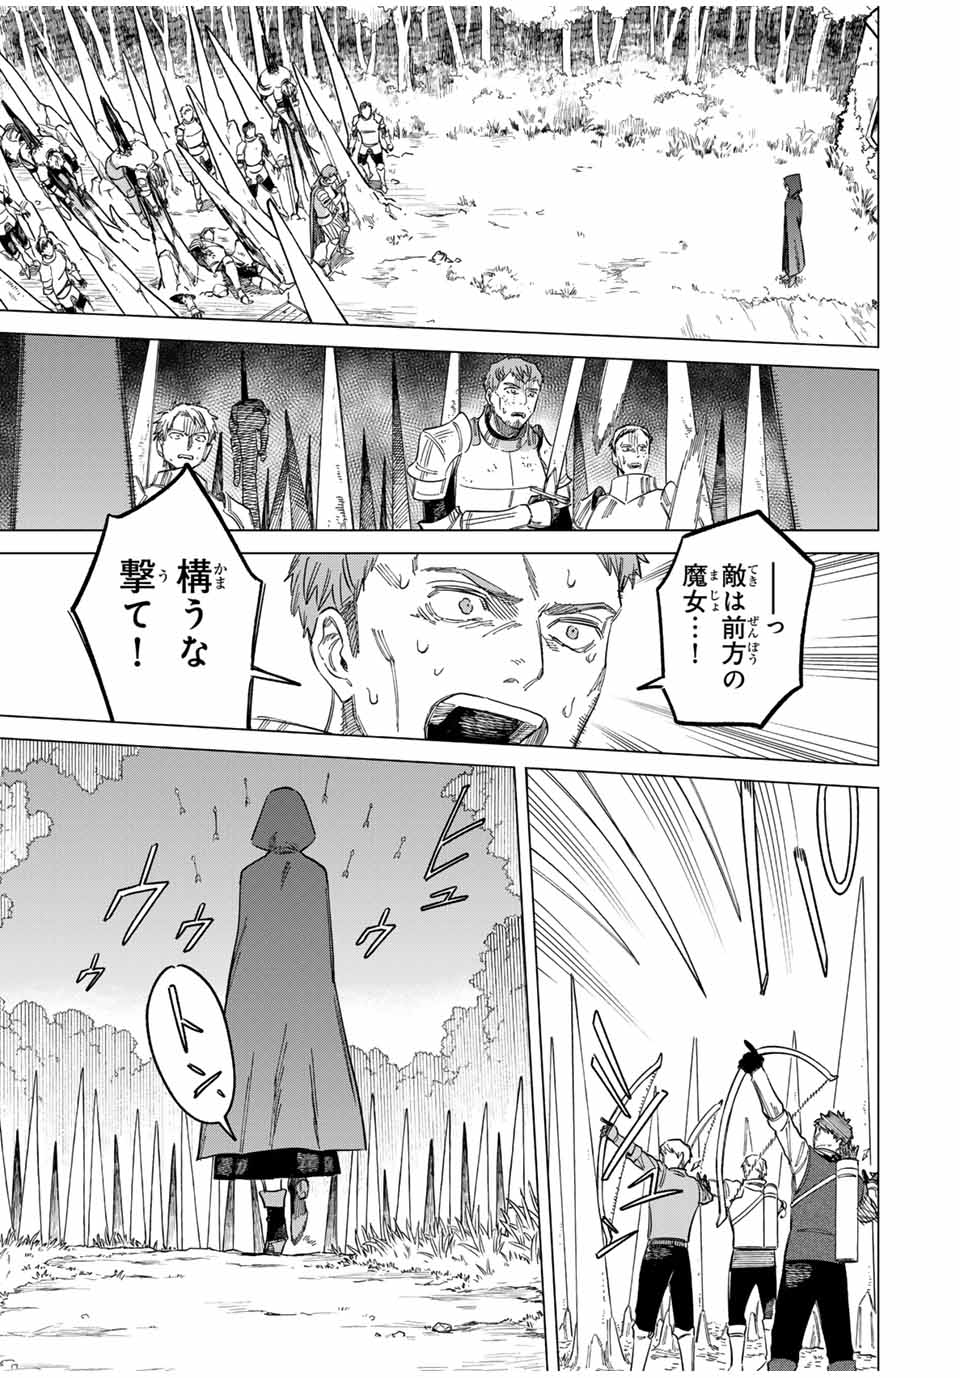 Witch and Mercenary 魔女と傭兵 第1.1話 - Page 21